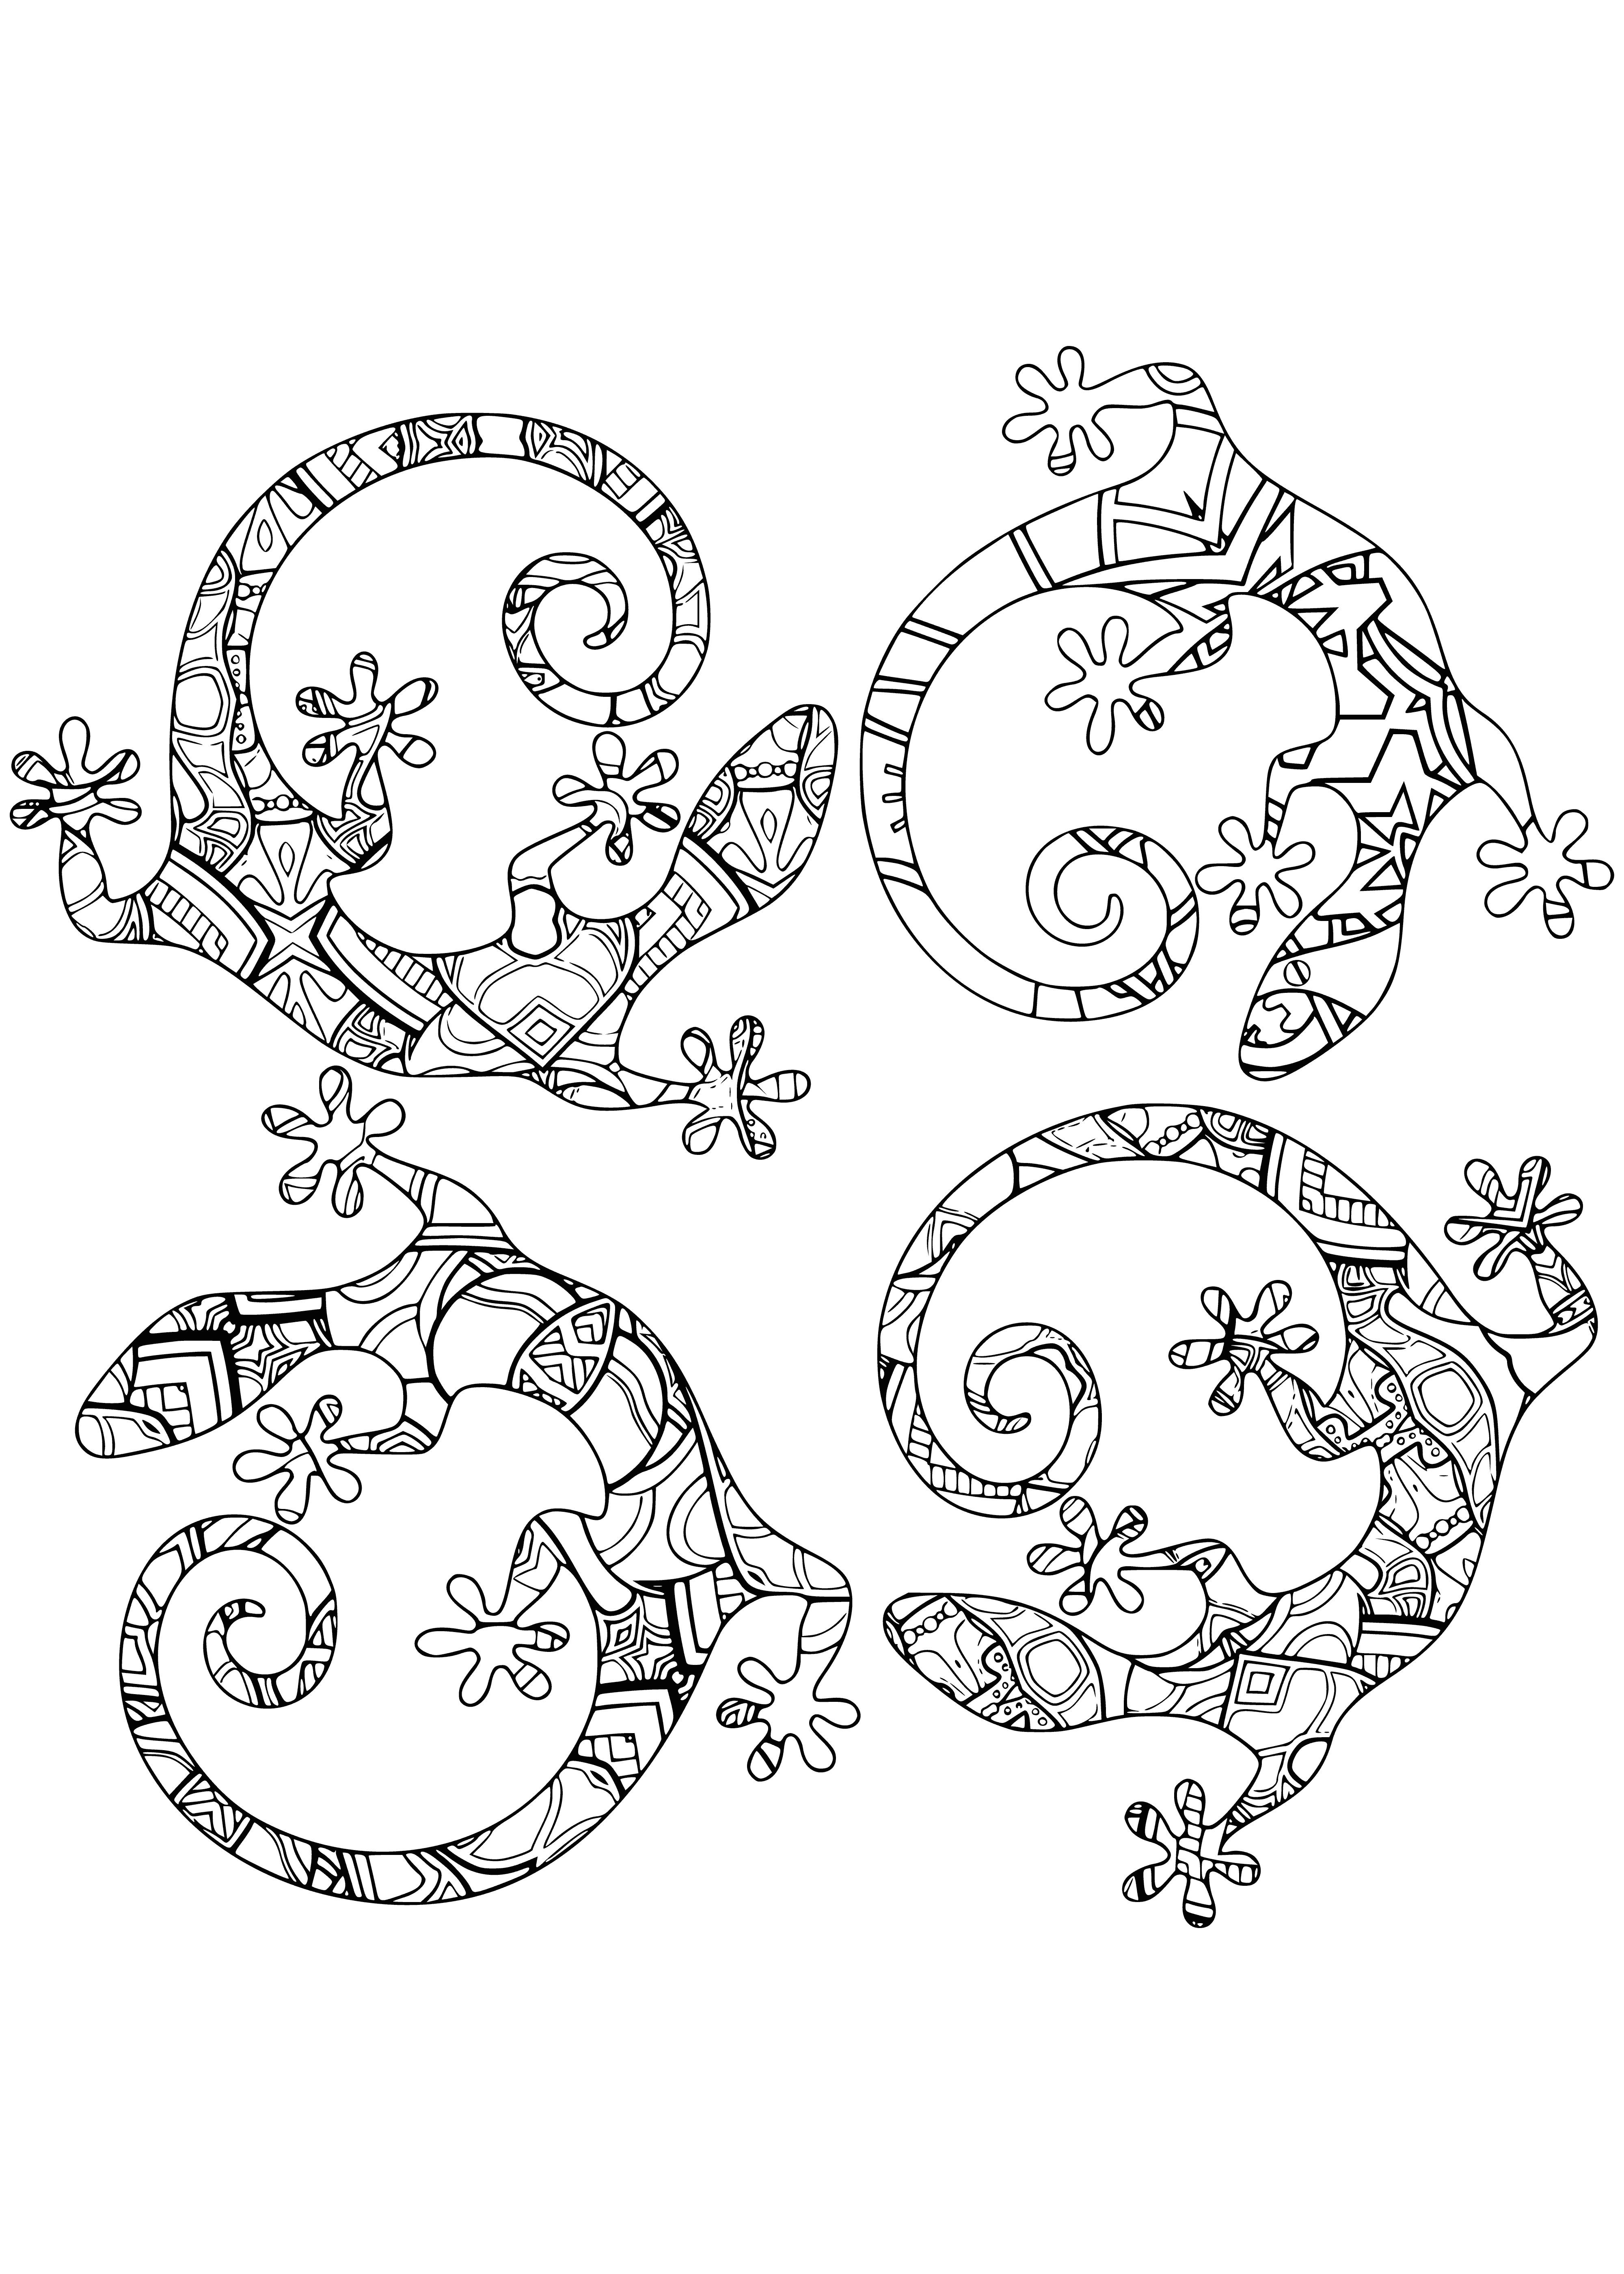 coloring page: 3 lizards - green, brown, yellow - smiling, enjoying themselves! #lizards #coloring #happiness